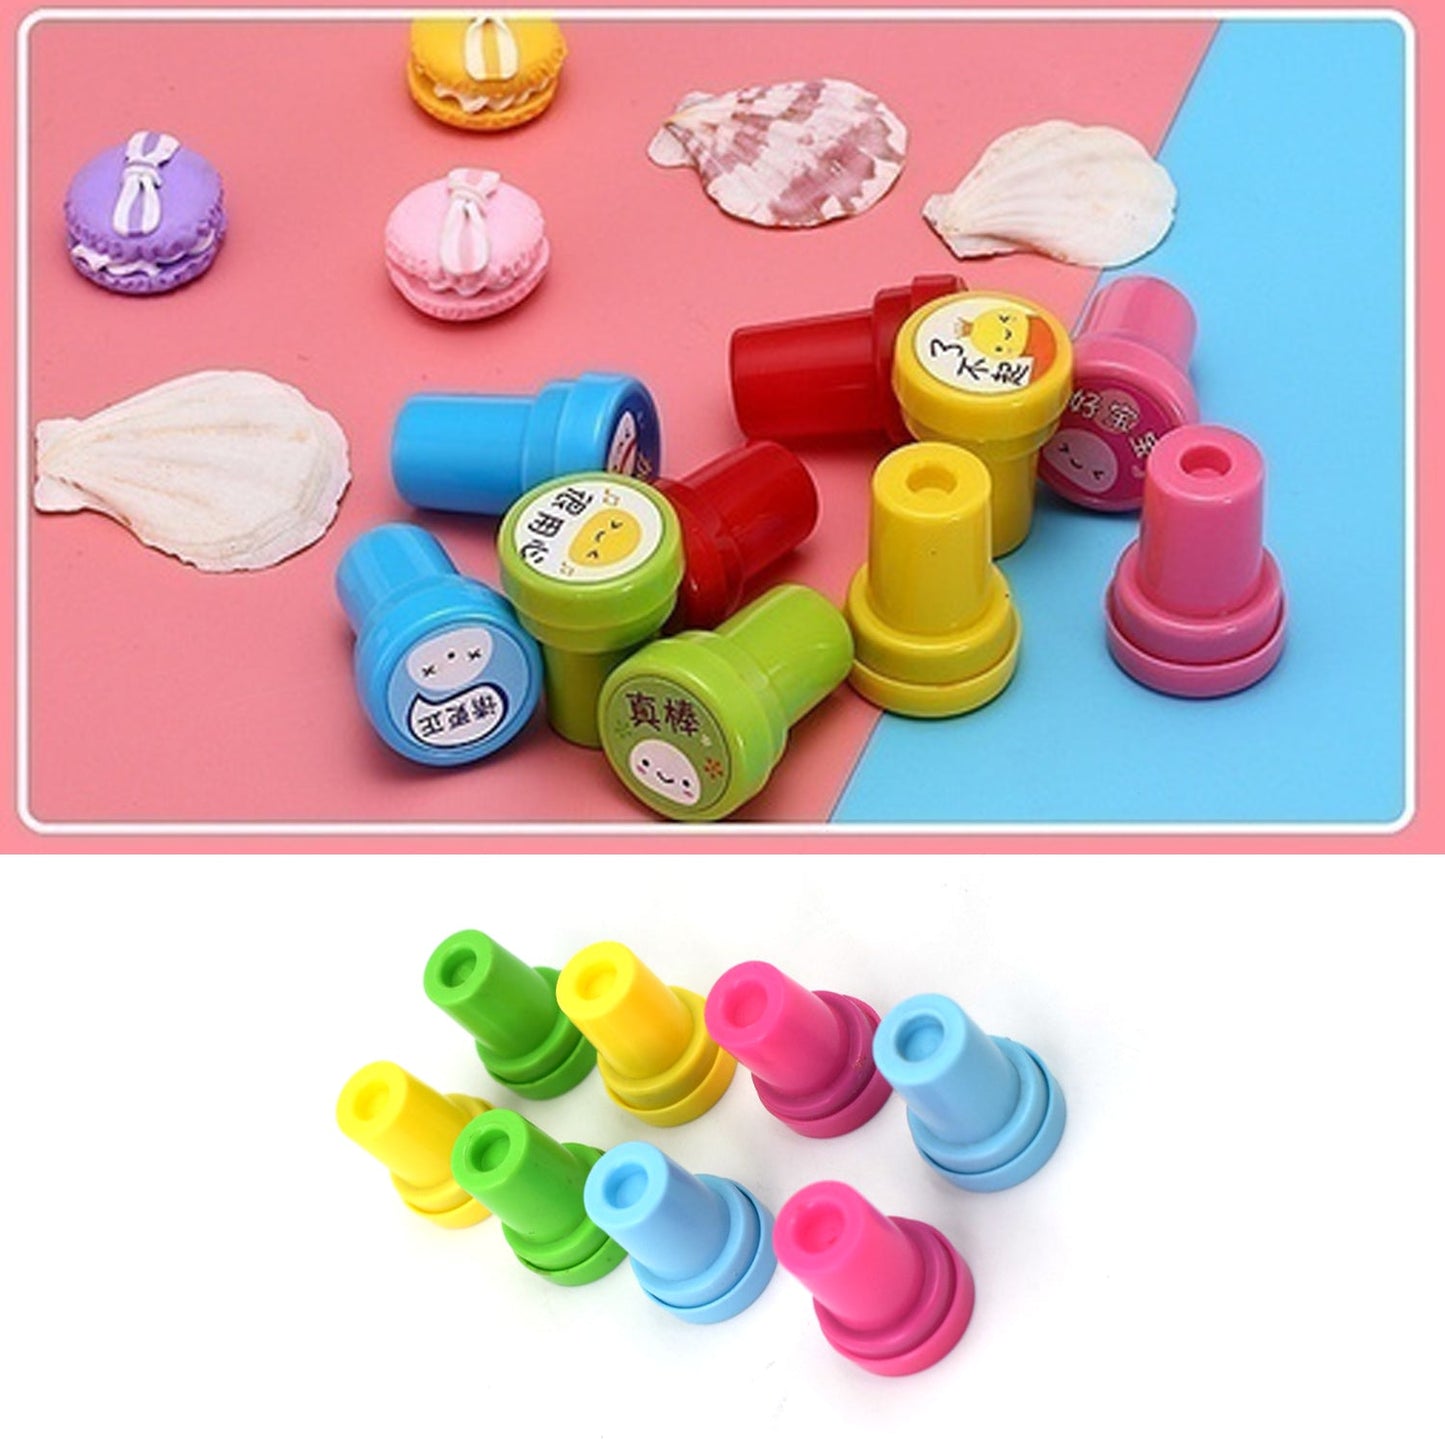 4803 Emoticon Stamps 8 pieces in Round Shape Stamp for Kids Theme Stamps for School Craft & Prefect Gift for Teachers, Parents and Students (Multicolor)